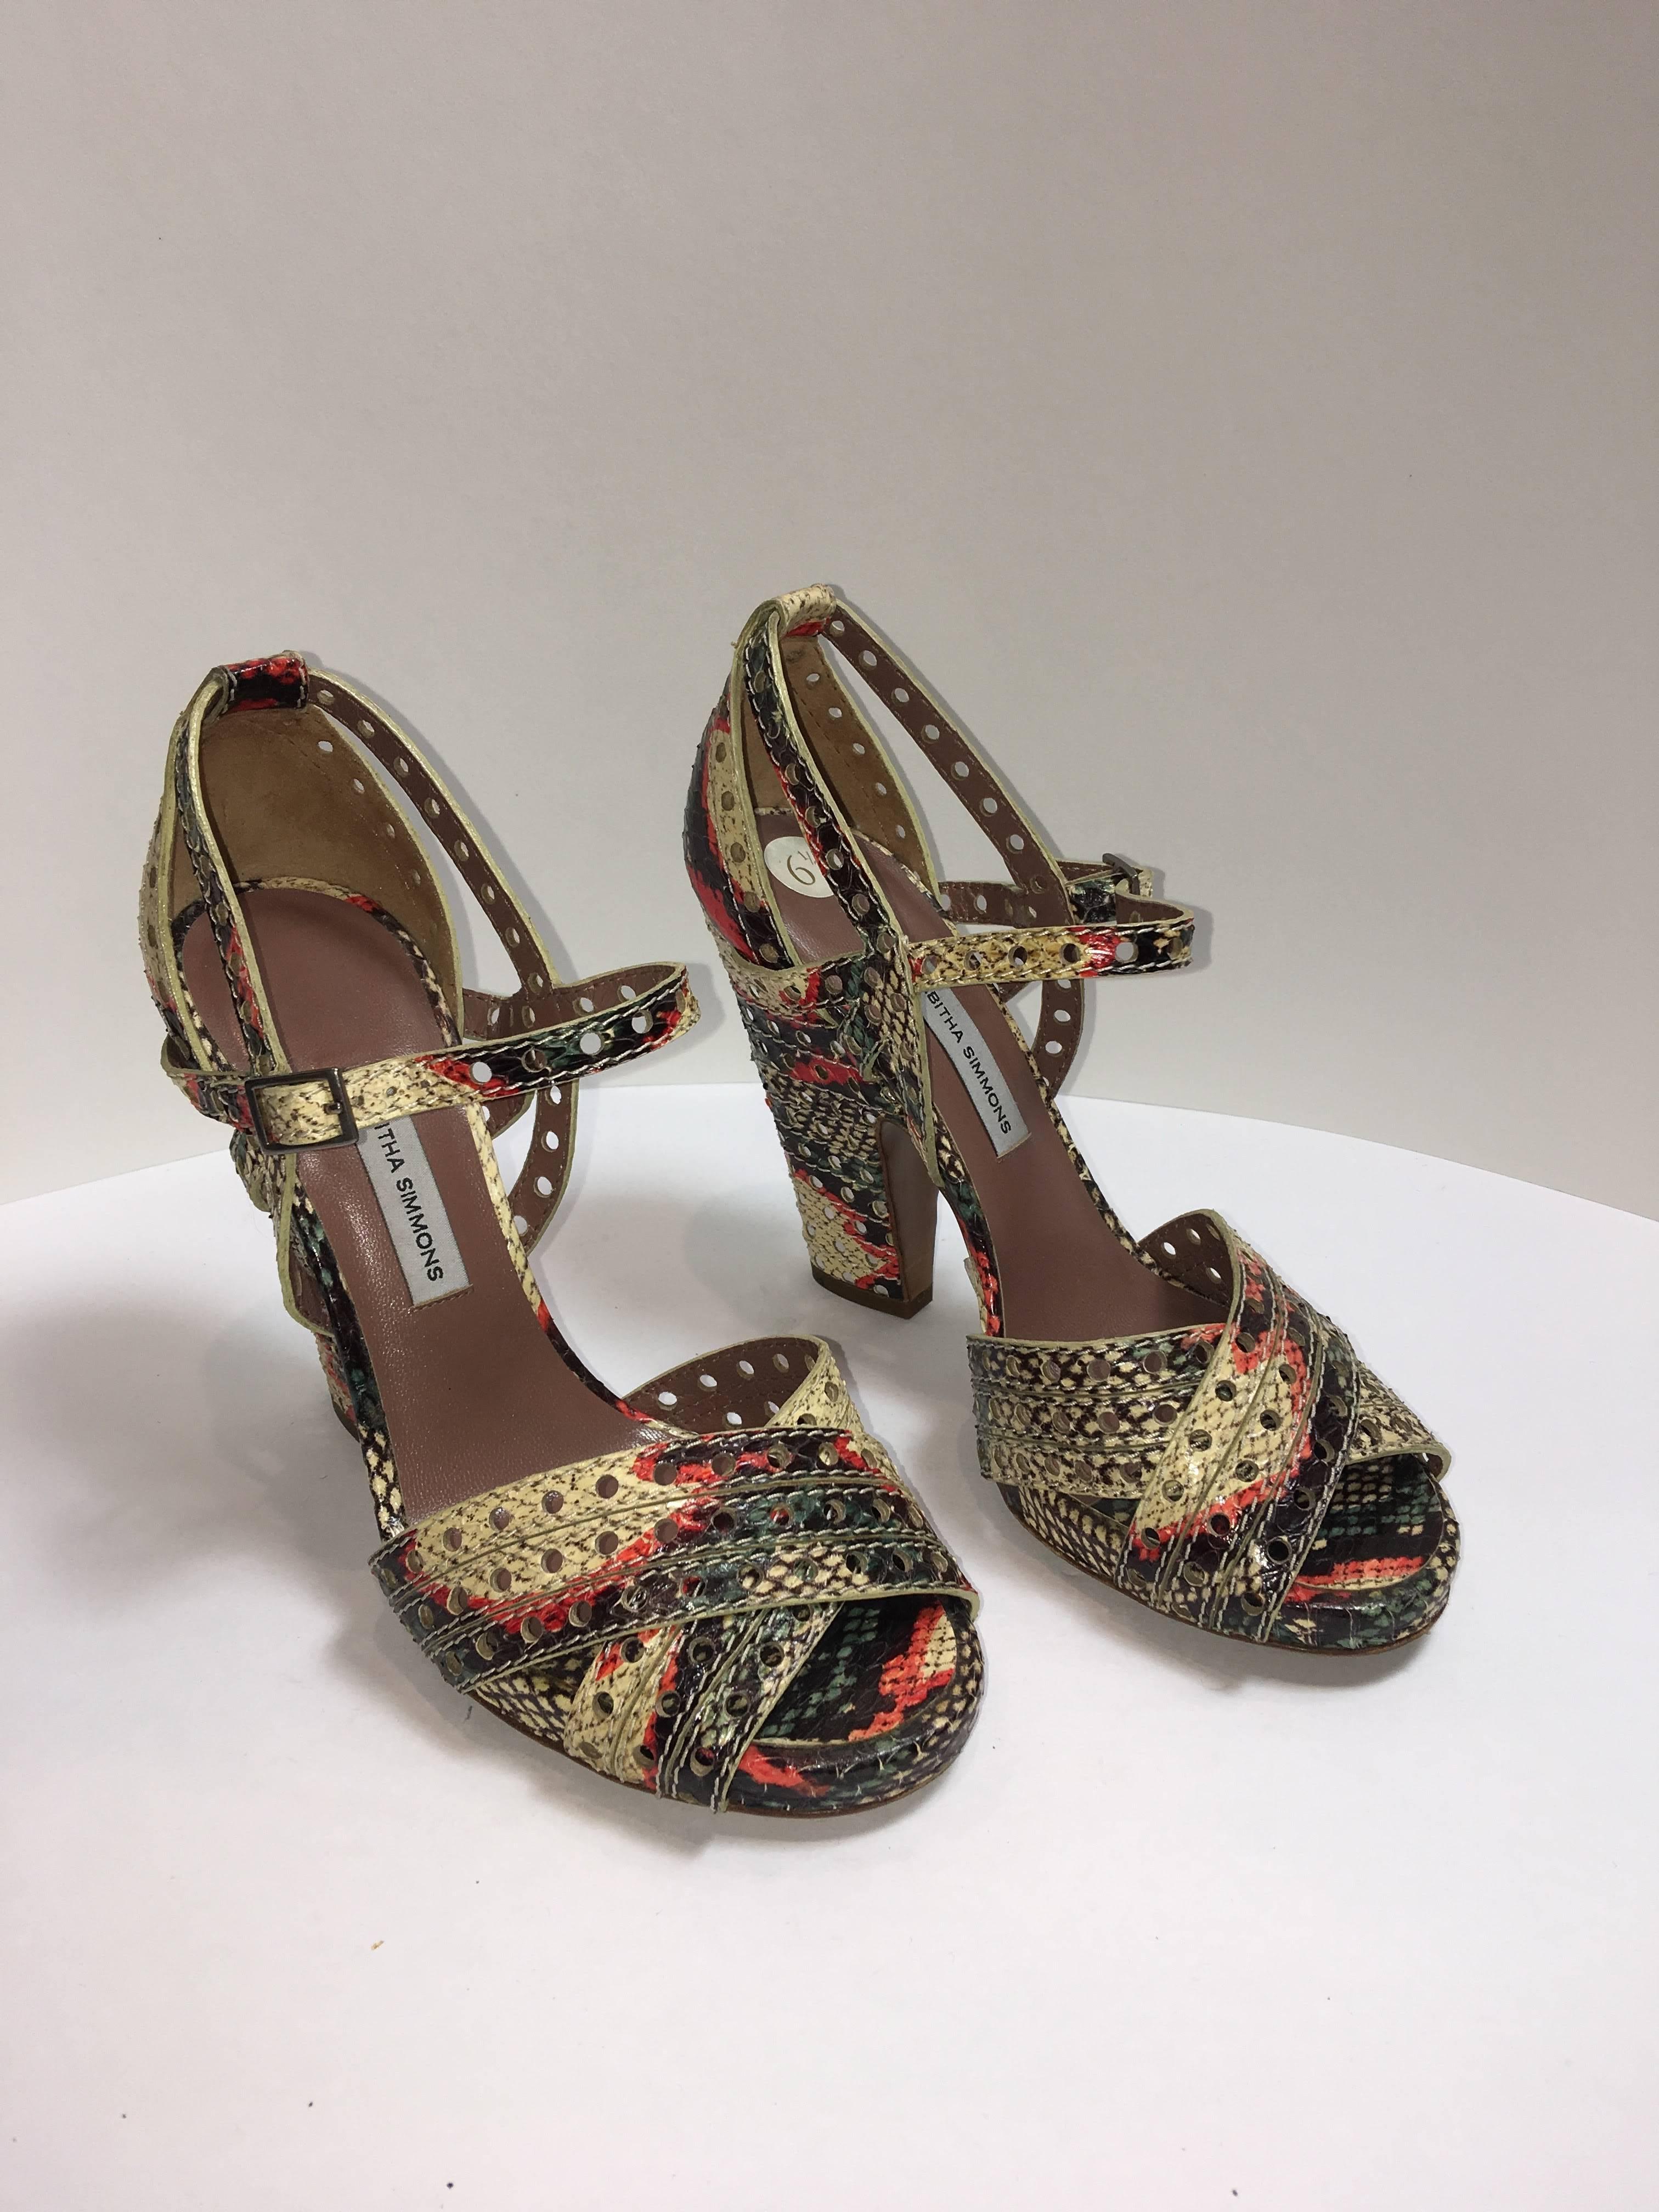 Tabitha Simmons Multi-colored python heeled sandals. Size 36.5 with silver circle detail. 